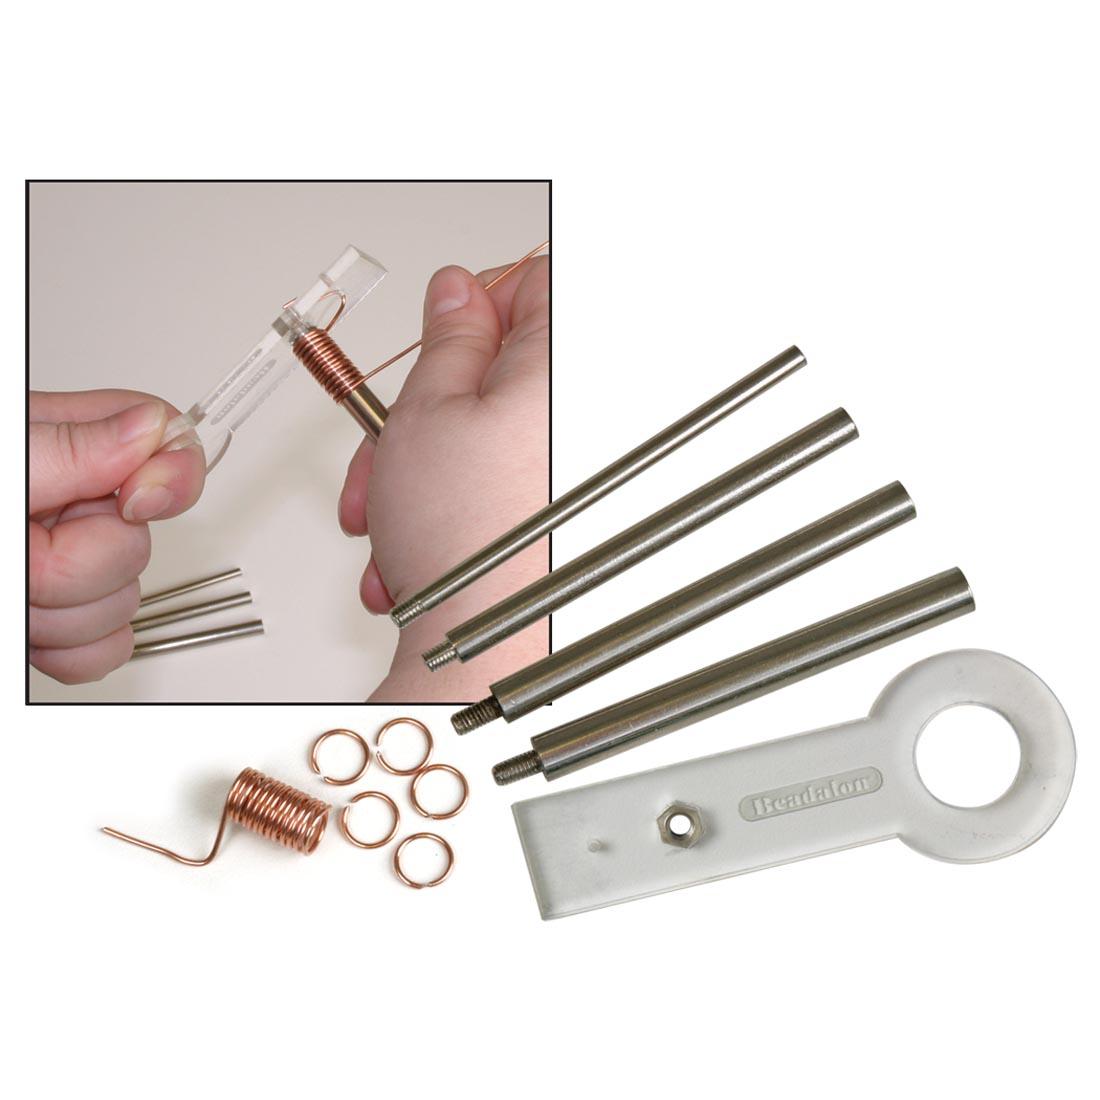 Beadalon Jump Ring Maker Set with an inset picture of it in use